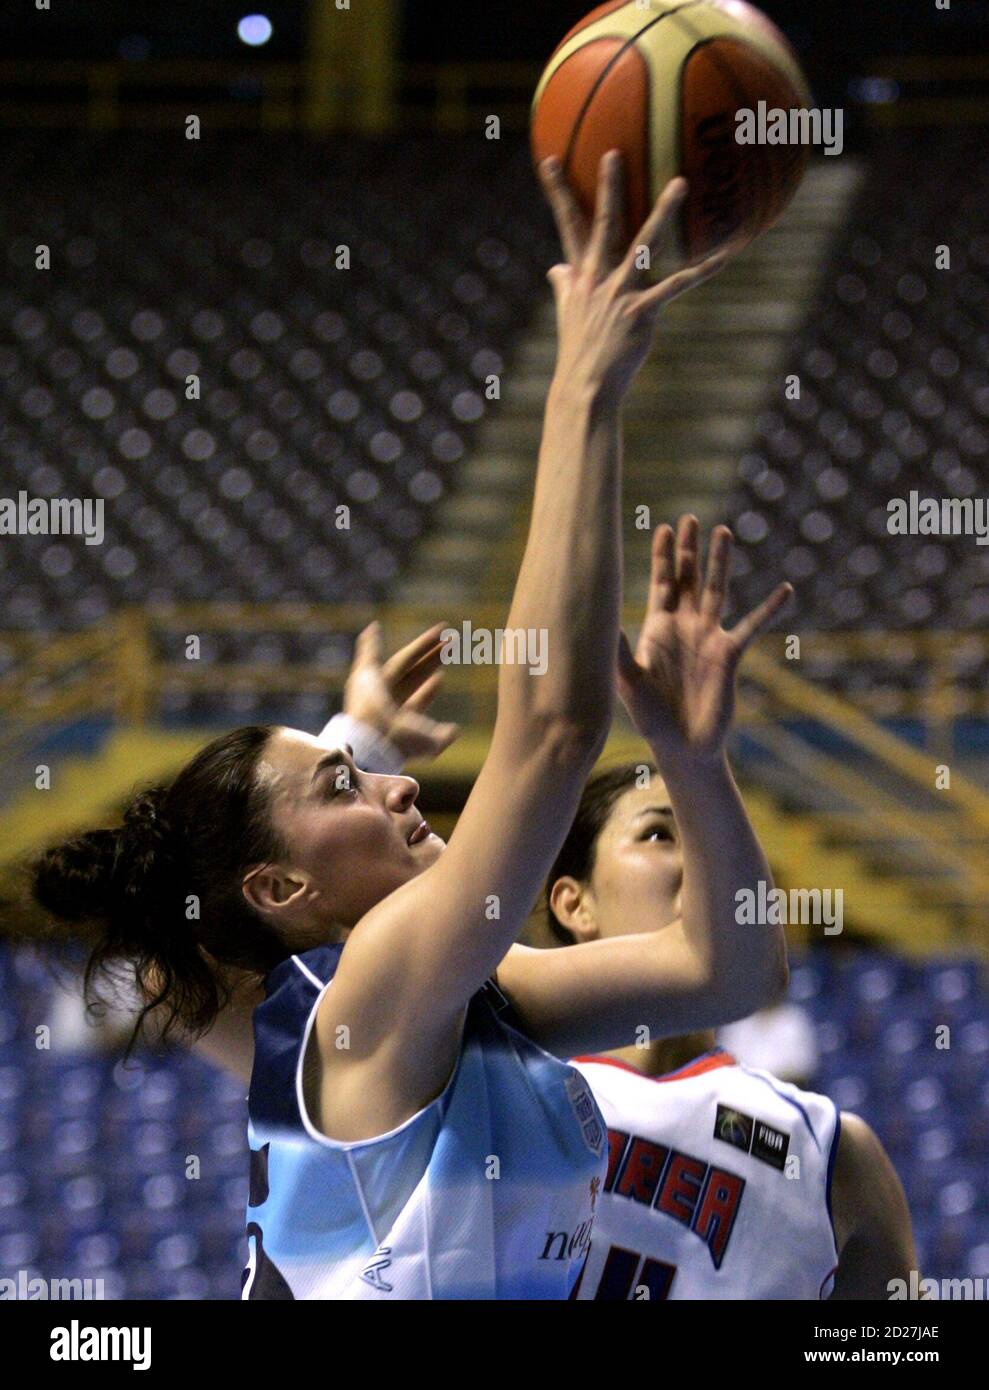 South Korea's Kwe Ryong Kim (R) tries to stop Argentina's Gisela Vega during their women's World Championship basketball game in Sao Paulo September 14, 2006. REUTERS/Paulo Whitaker (BRAZIL) Stock Photo